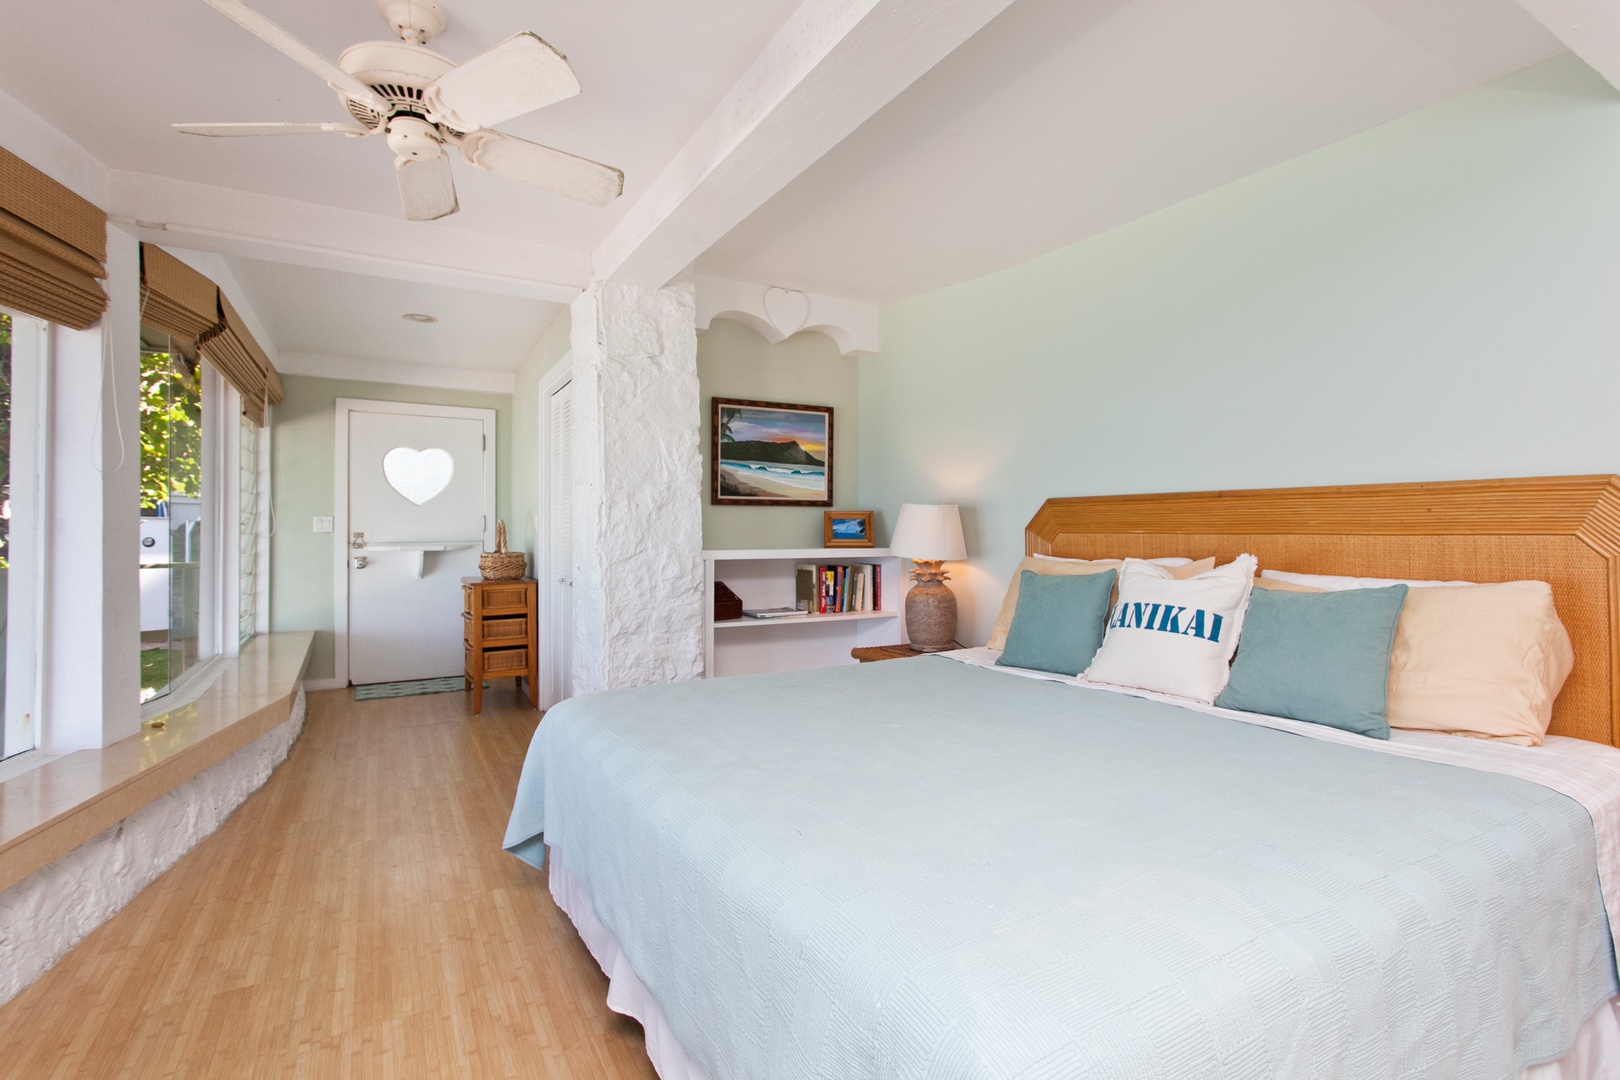 Kailua Vacation Rentals, Hale Kainalu* - The primary suite has storage, ceiling fan and king bed for a relaxing night.